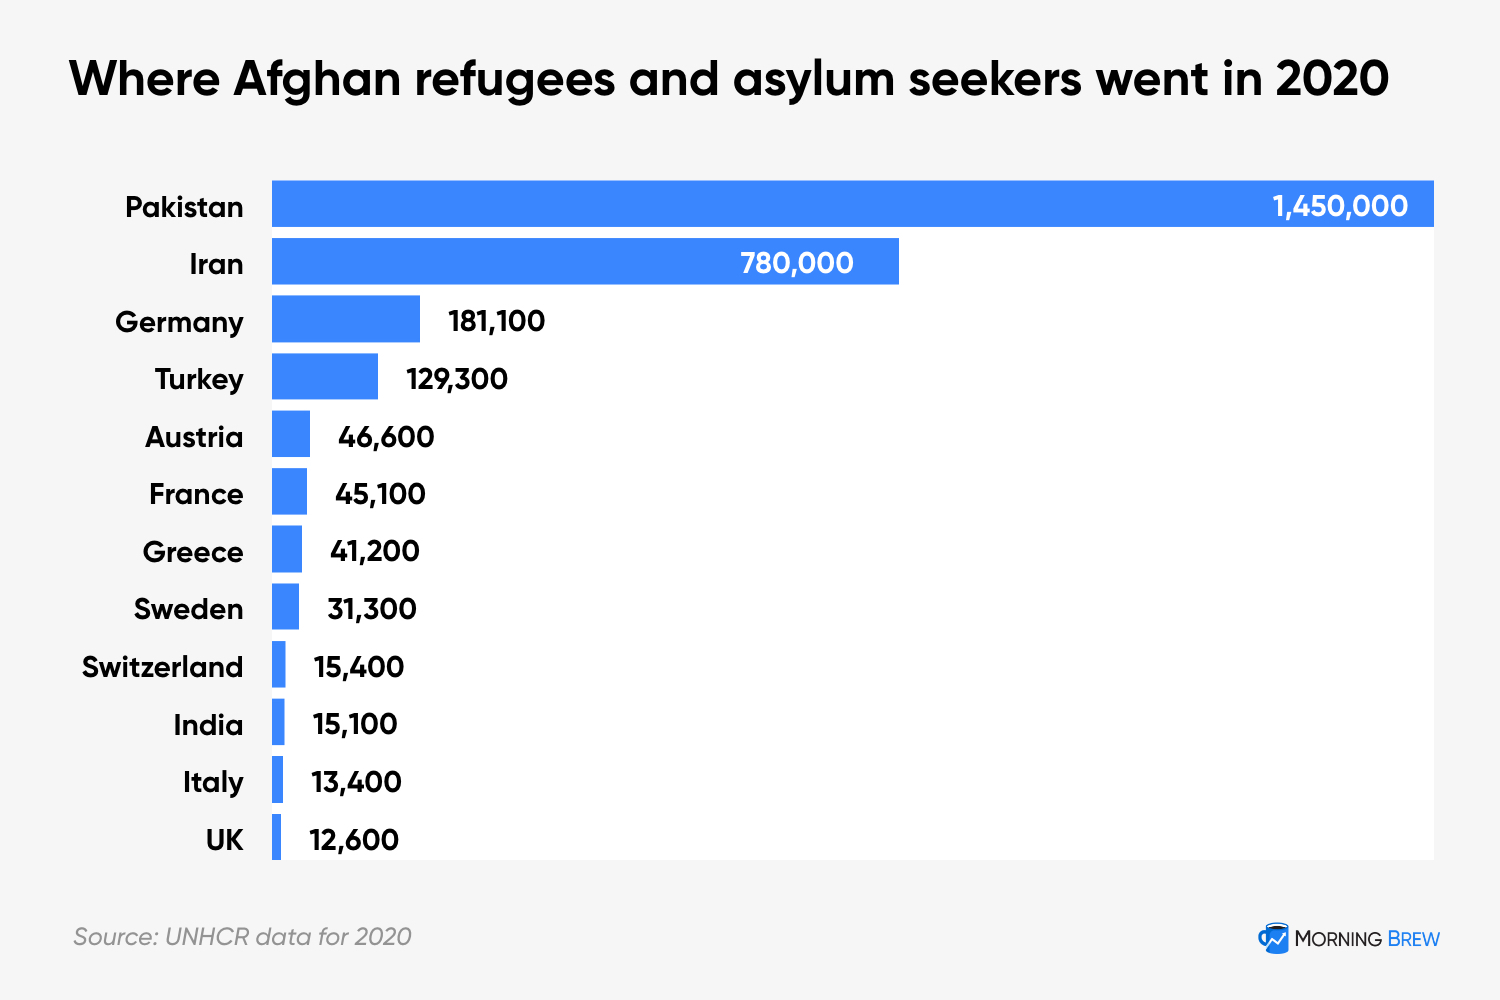 A chart of where Afghan refugees went in 2020